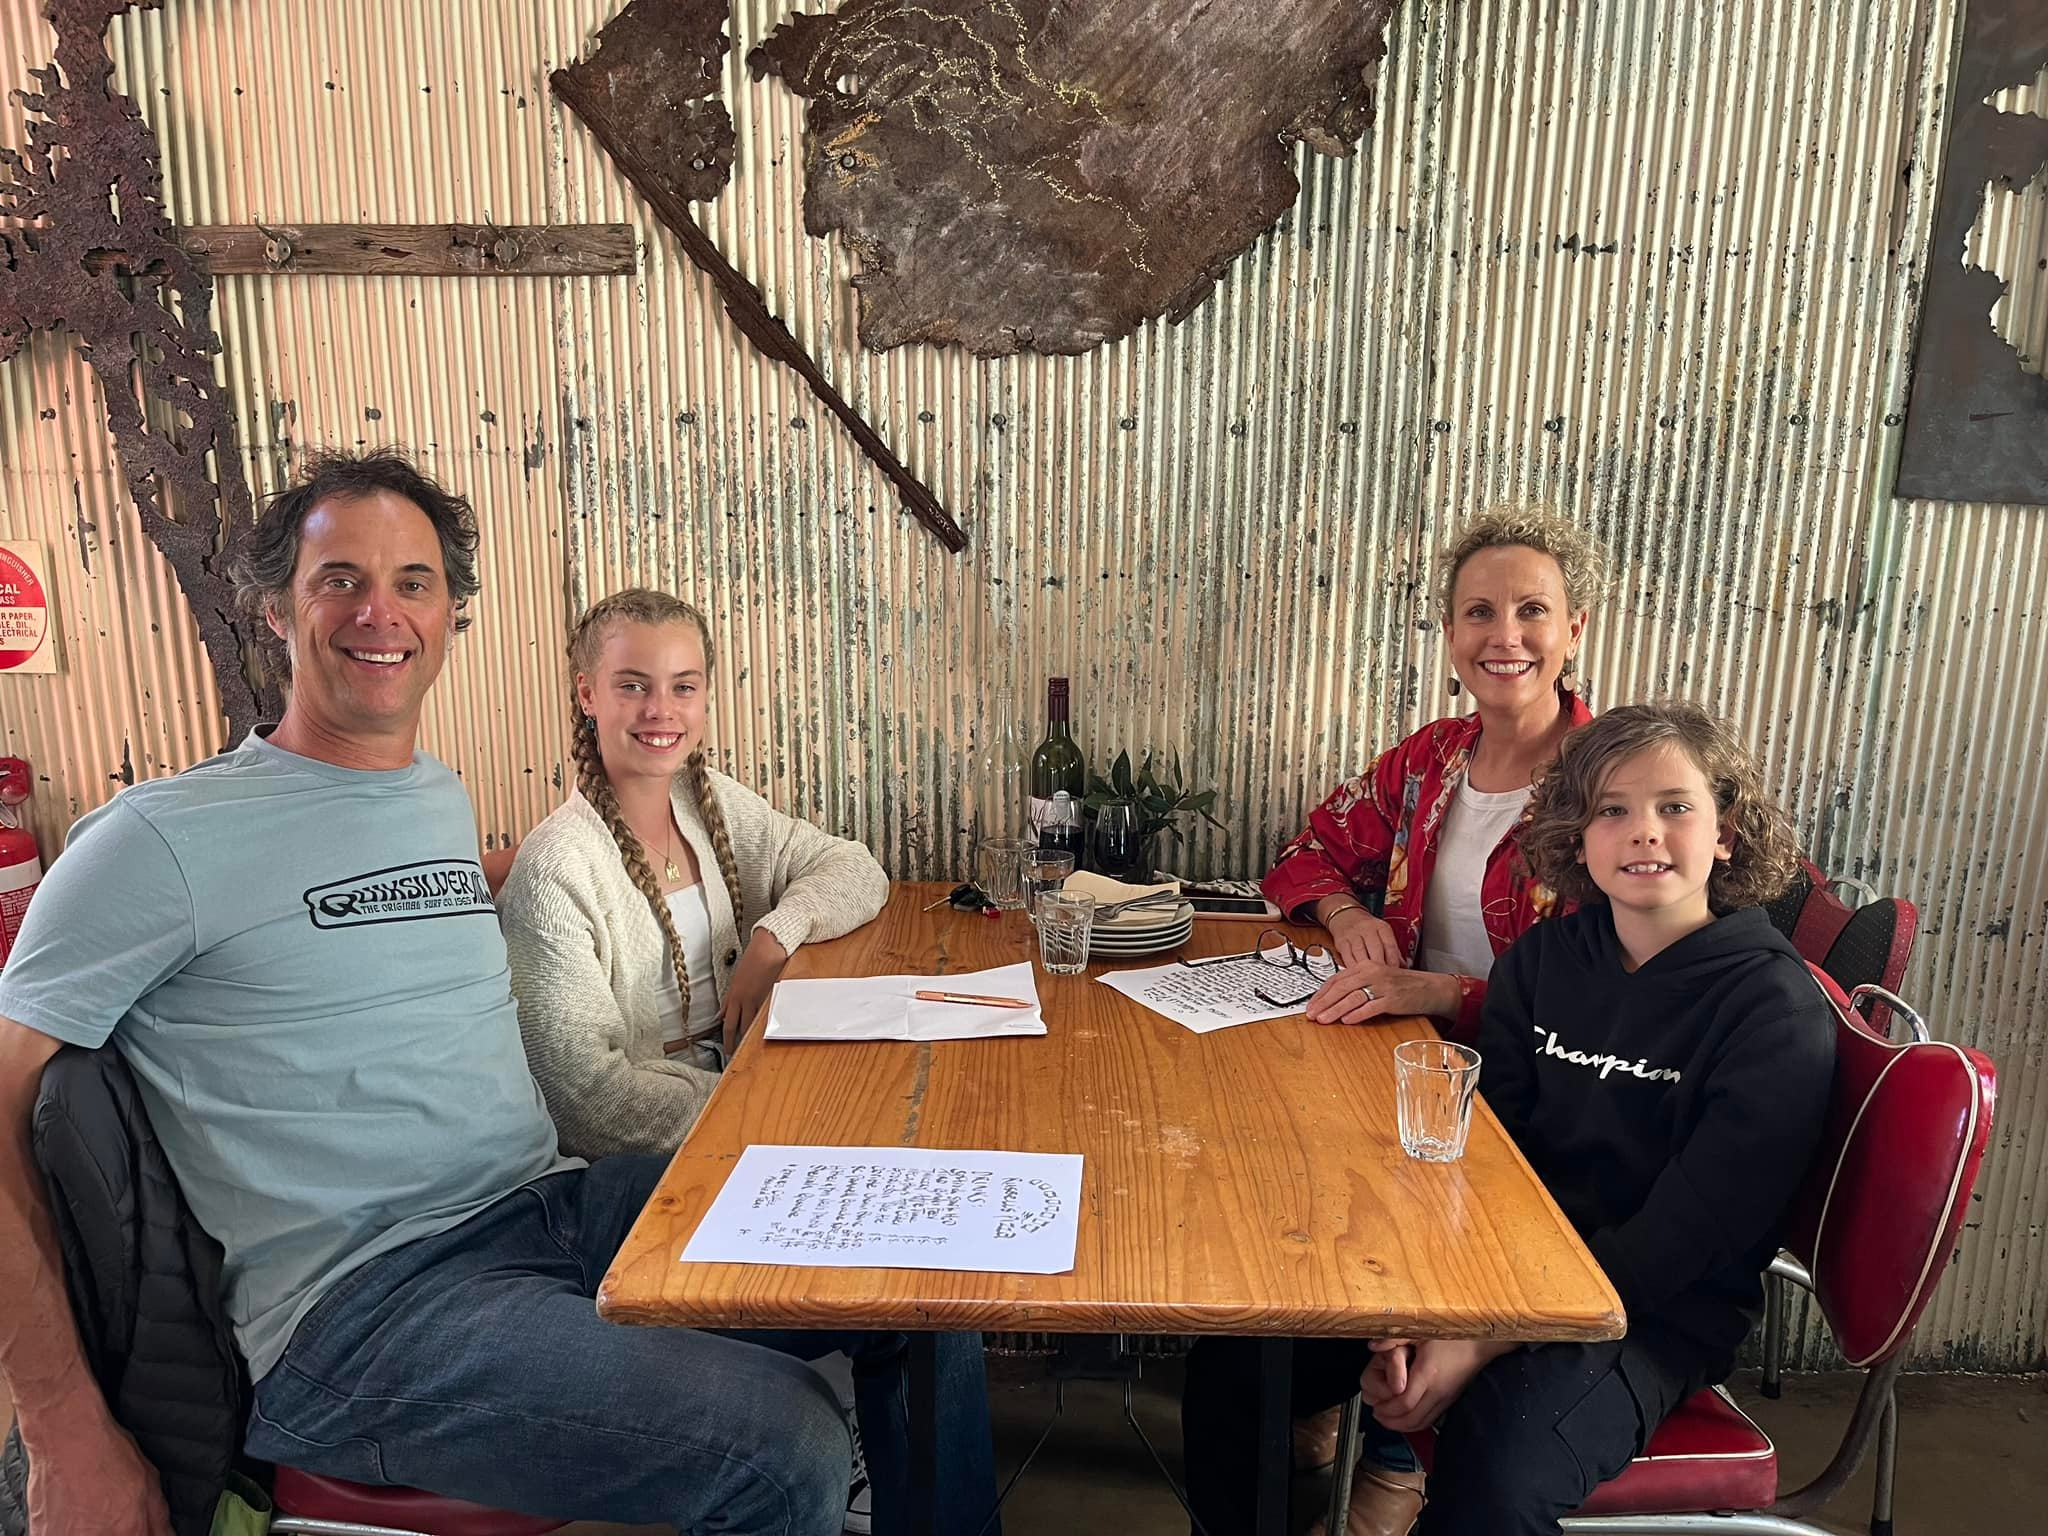 A family of four sat at a cafe table all smiling at the camera. At the back, Tania is sat across from her daughter. Her son  sits next to her and opposite him is her husband. They all look relaxed and happy.